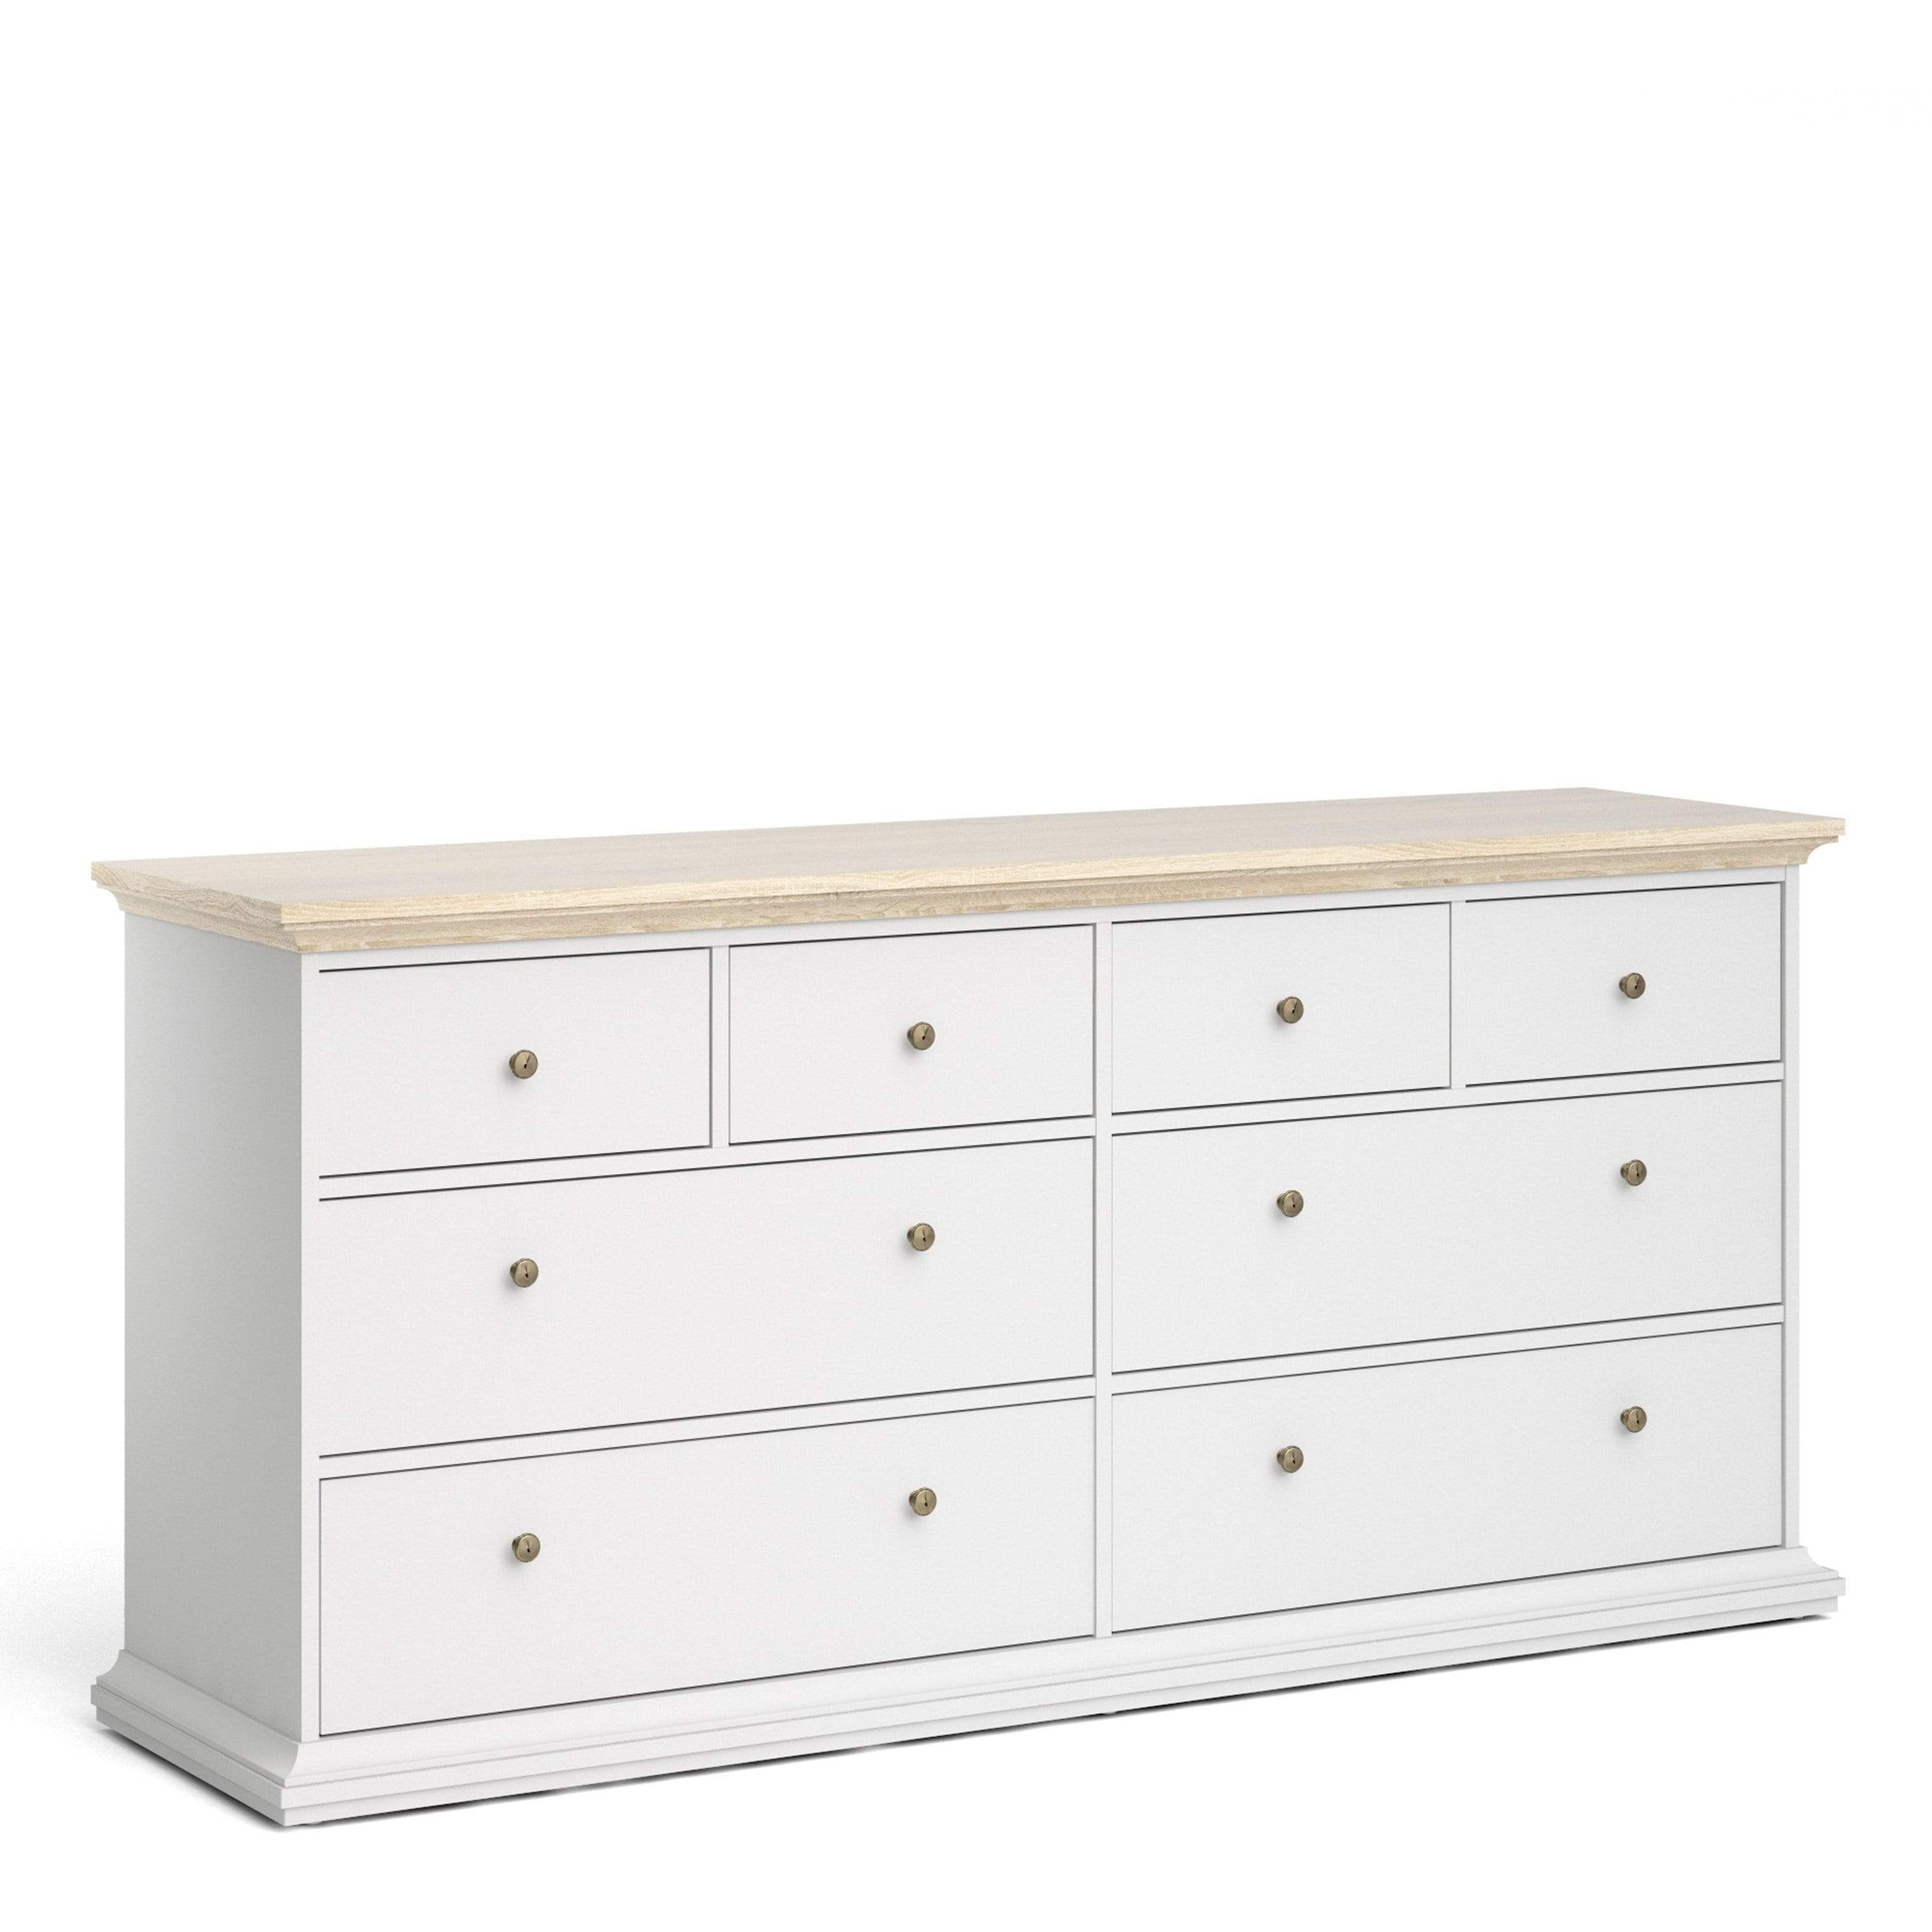 FTG Chest Of Drawers Paris Chest of 8 Drawers in White and Oak Bed Kings